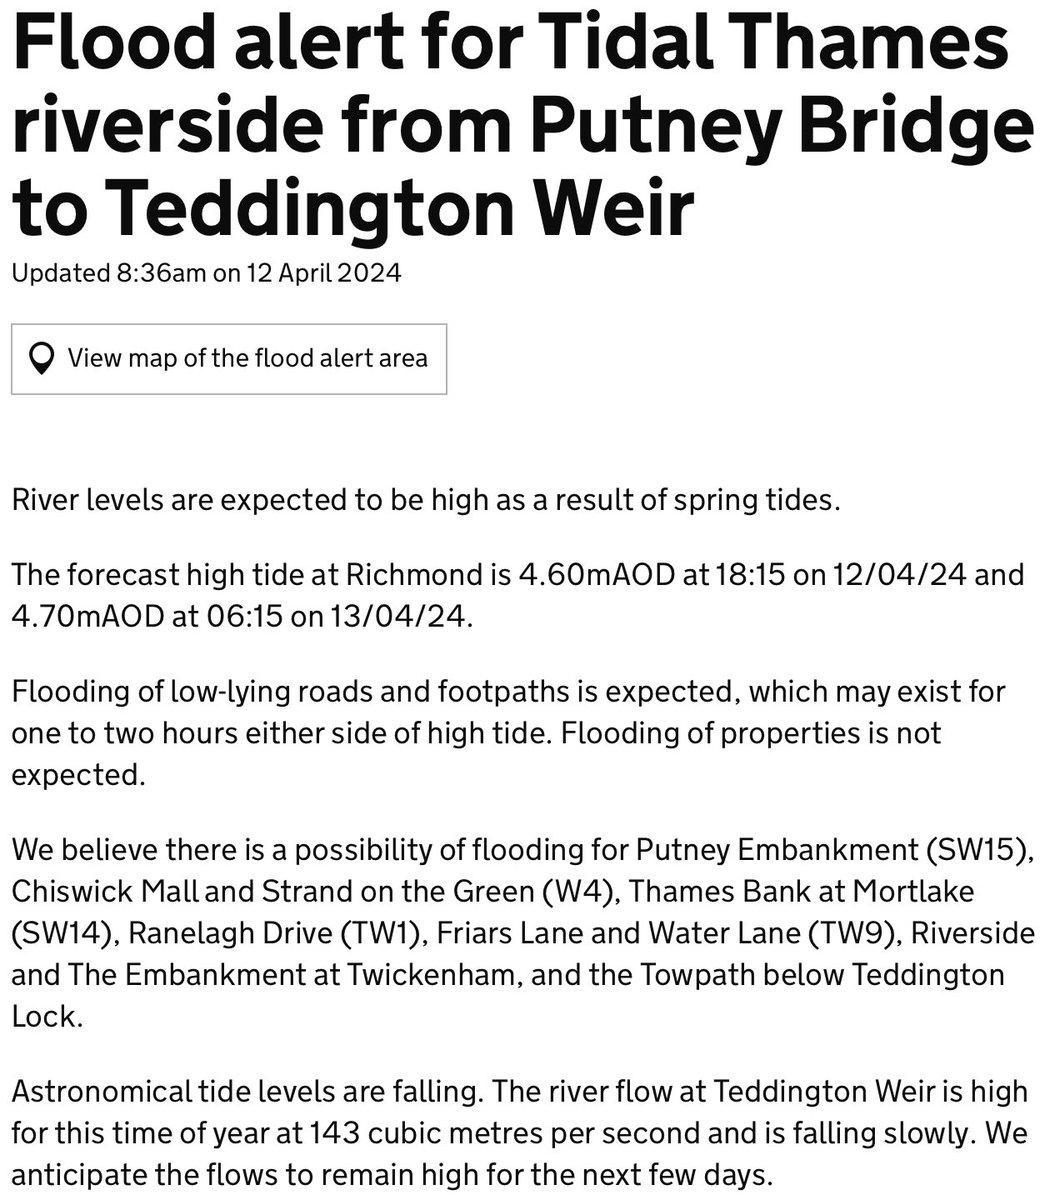 ⚠️ The forecast levels at #Richmond have been updated for high tides this afternoon and early tomorrow morning. The Flood Alert covering tidal riverside properties from Putney to Teddington can then be removed tomorrow as the spring tides switch to neaps.